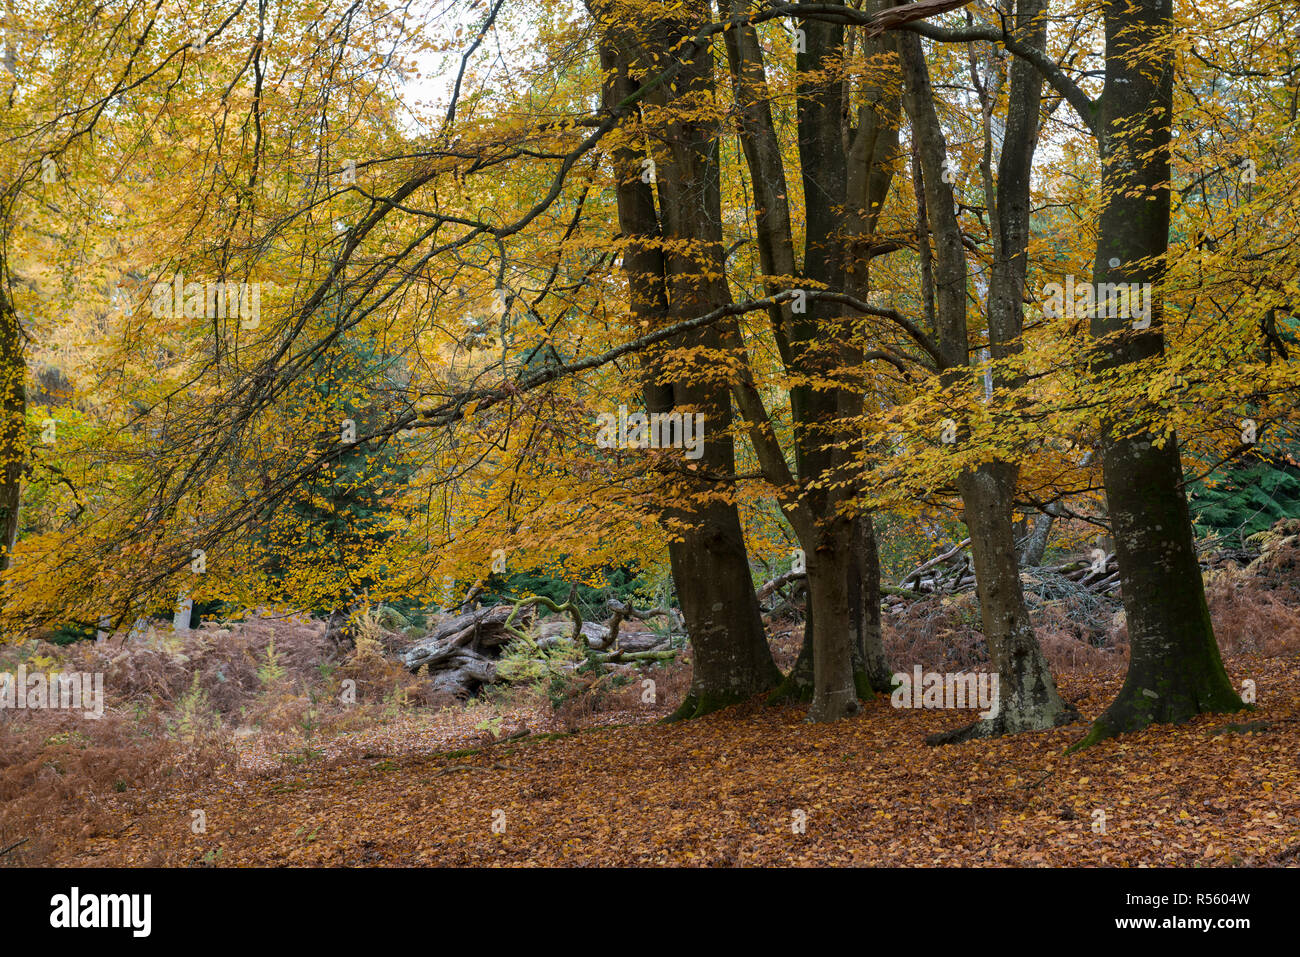 New Forest in Autumn near Burley, Hampshire, England. Stock Photo